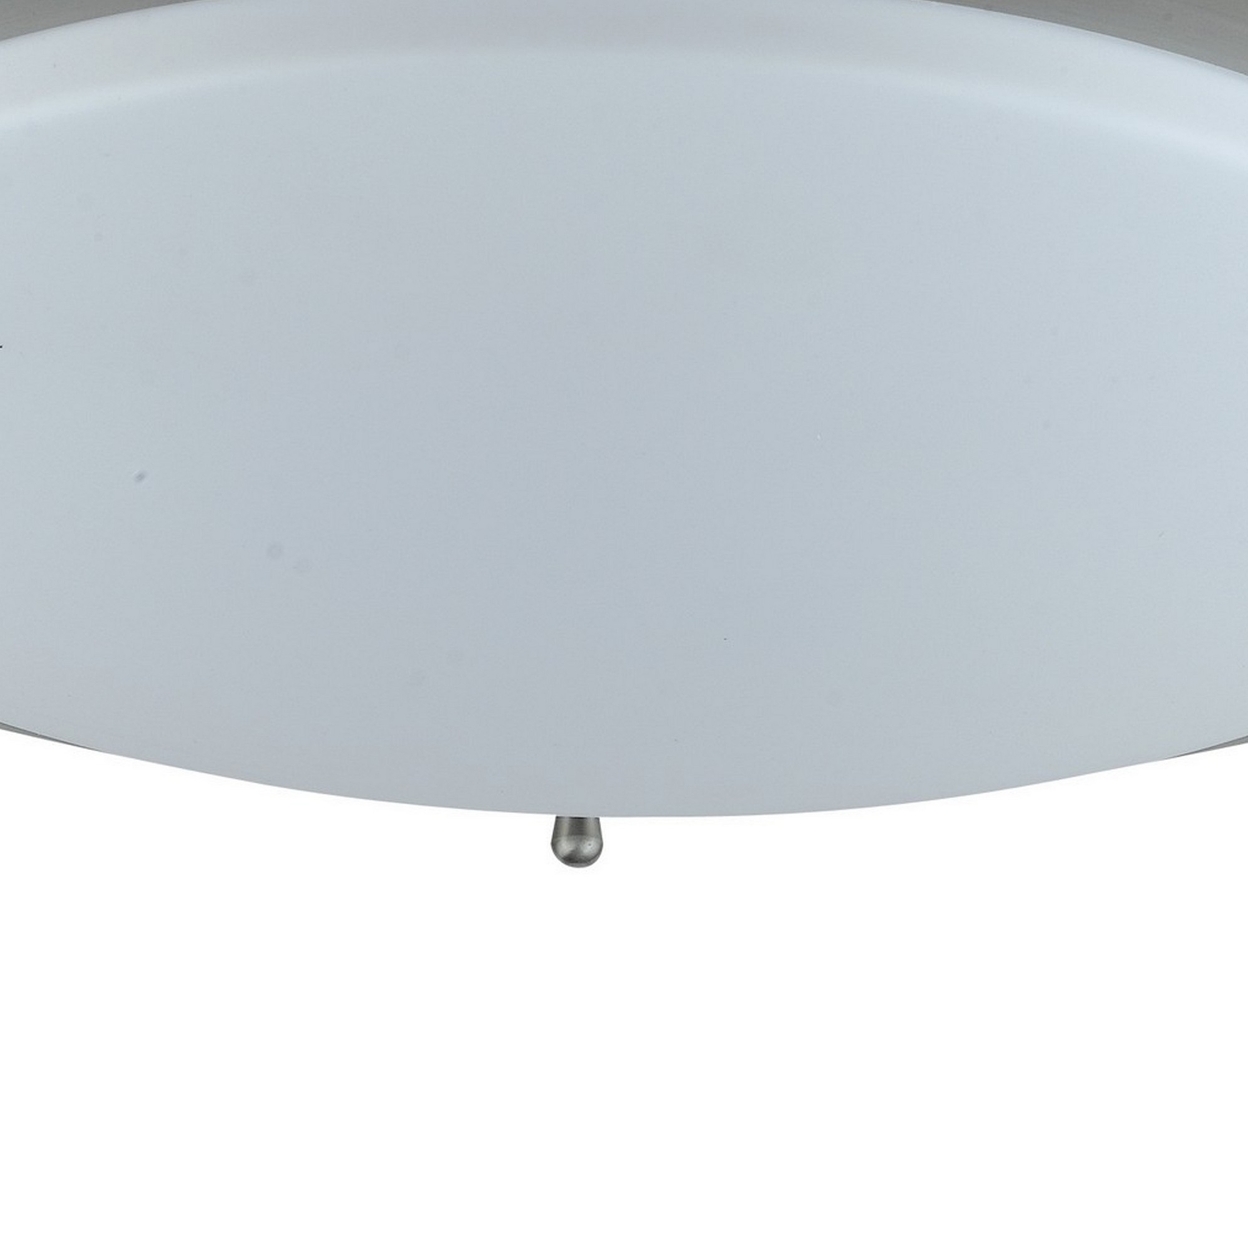 14 Inch Modern Ceiling Lamp With Frosted Acrylic Plate, Steel Trim, White- Saltoro Sherpi